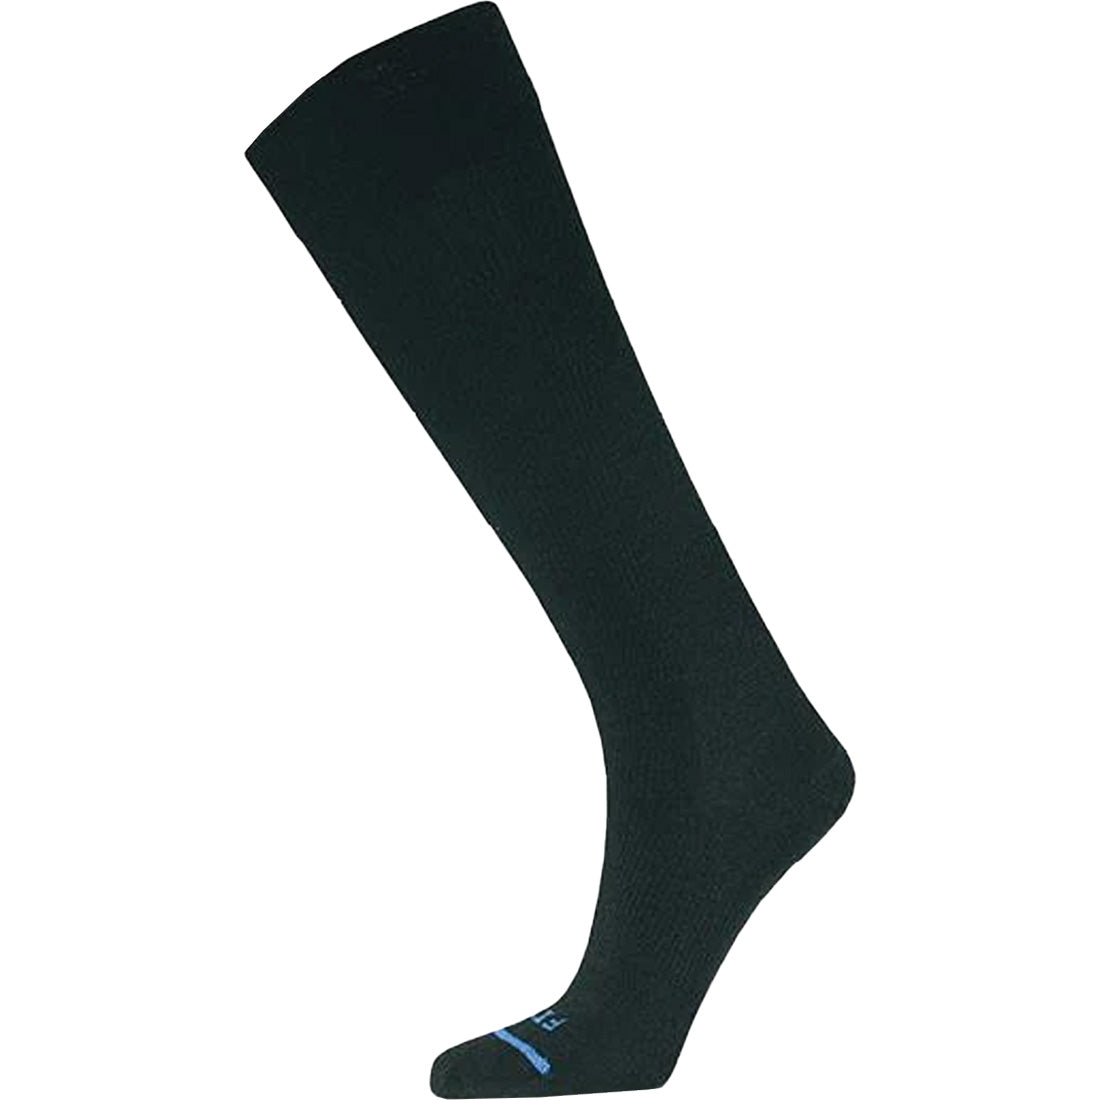 FITS Cushioned Over-the-Calf Boot Sock